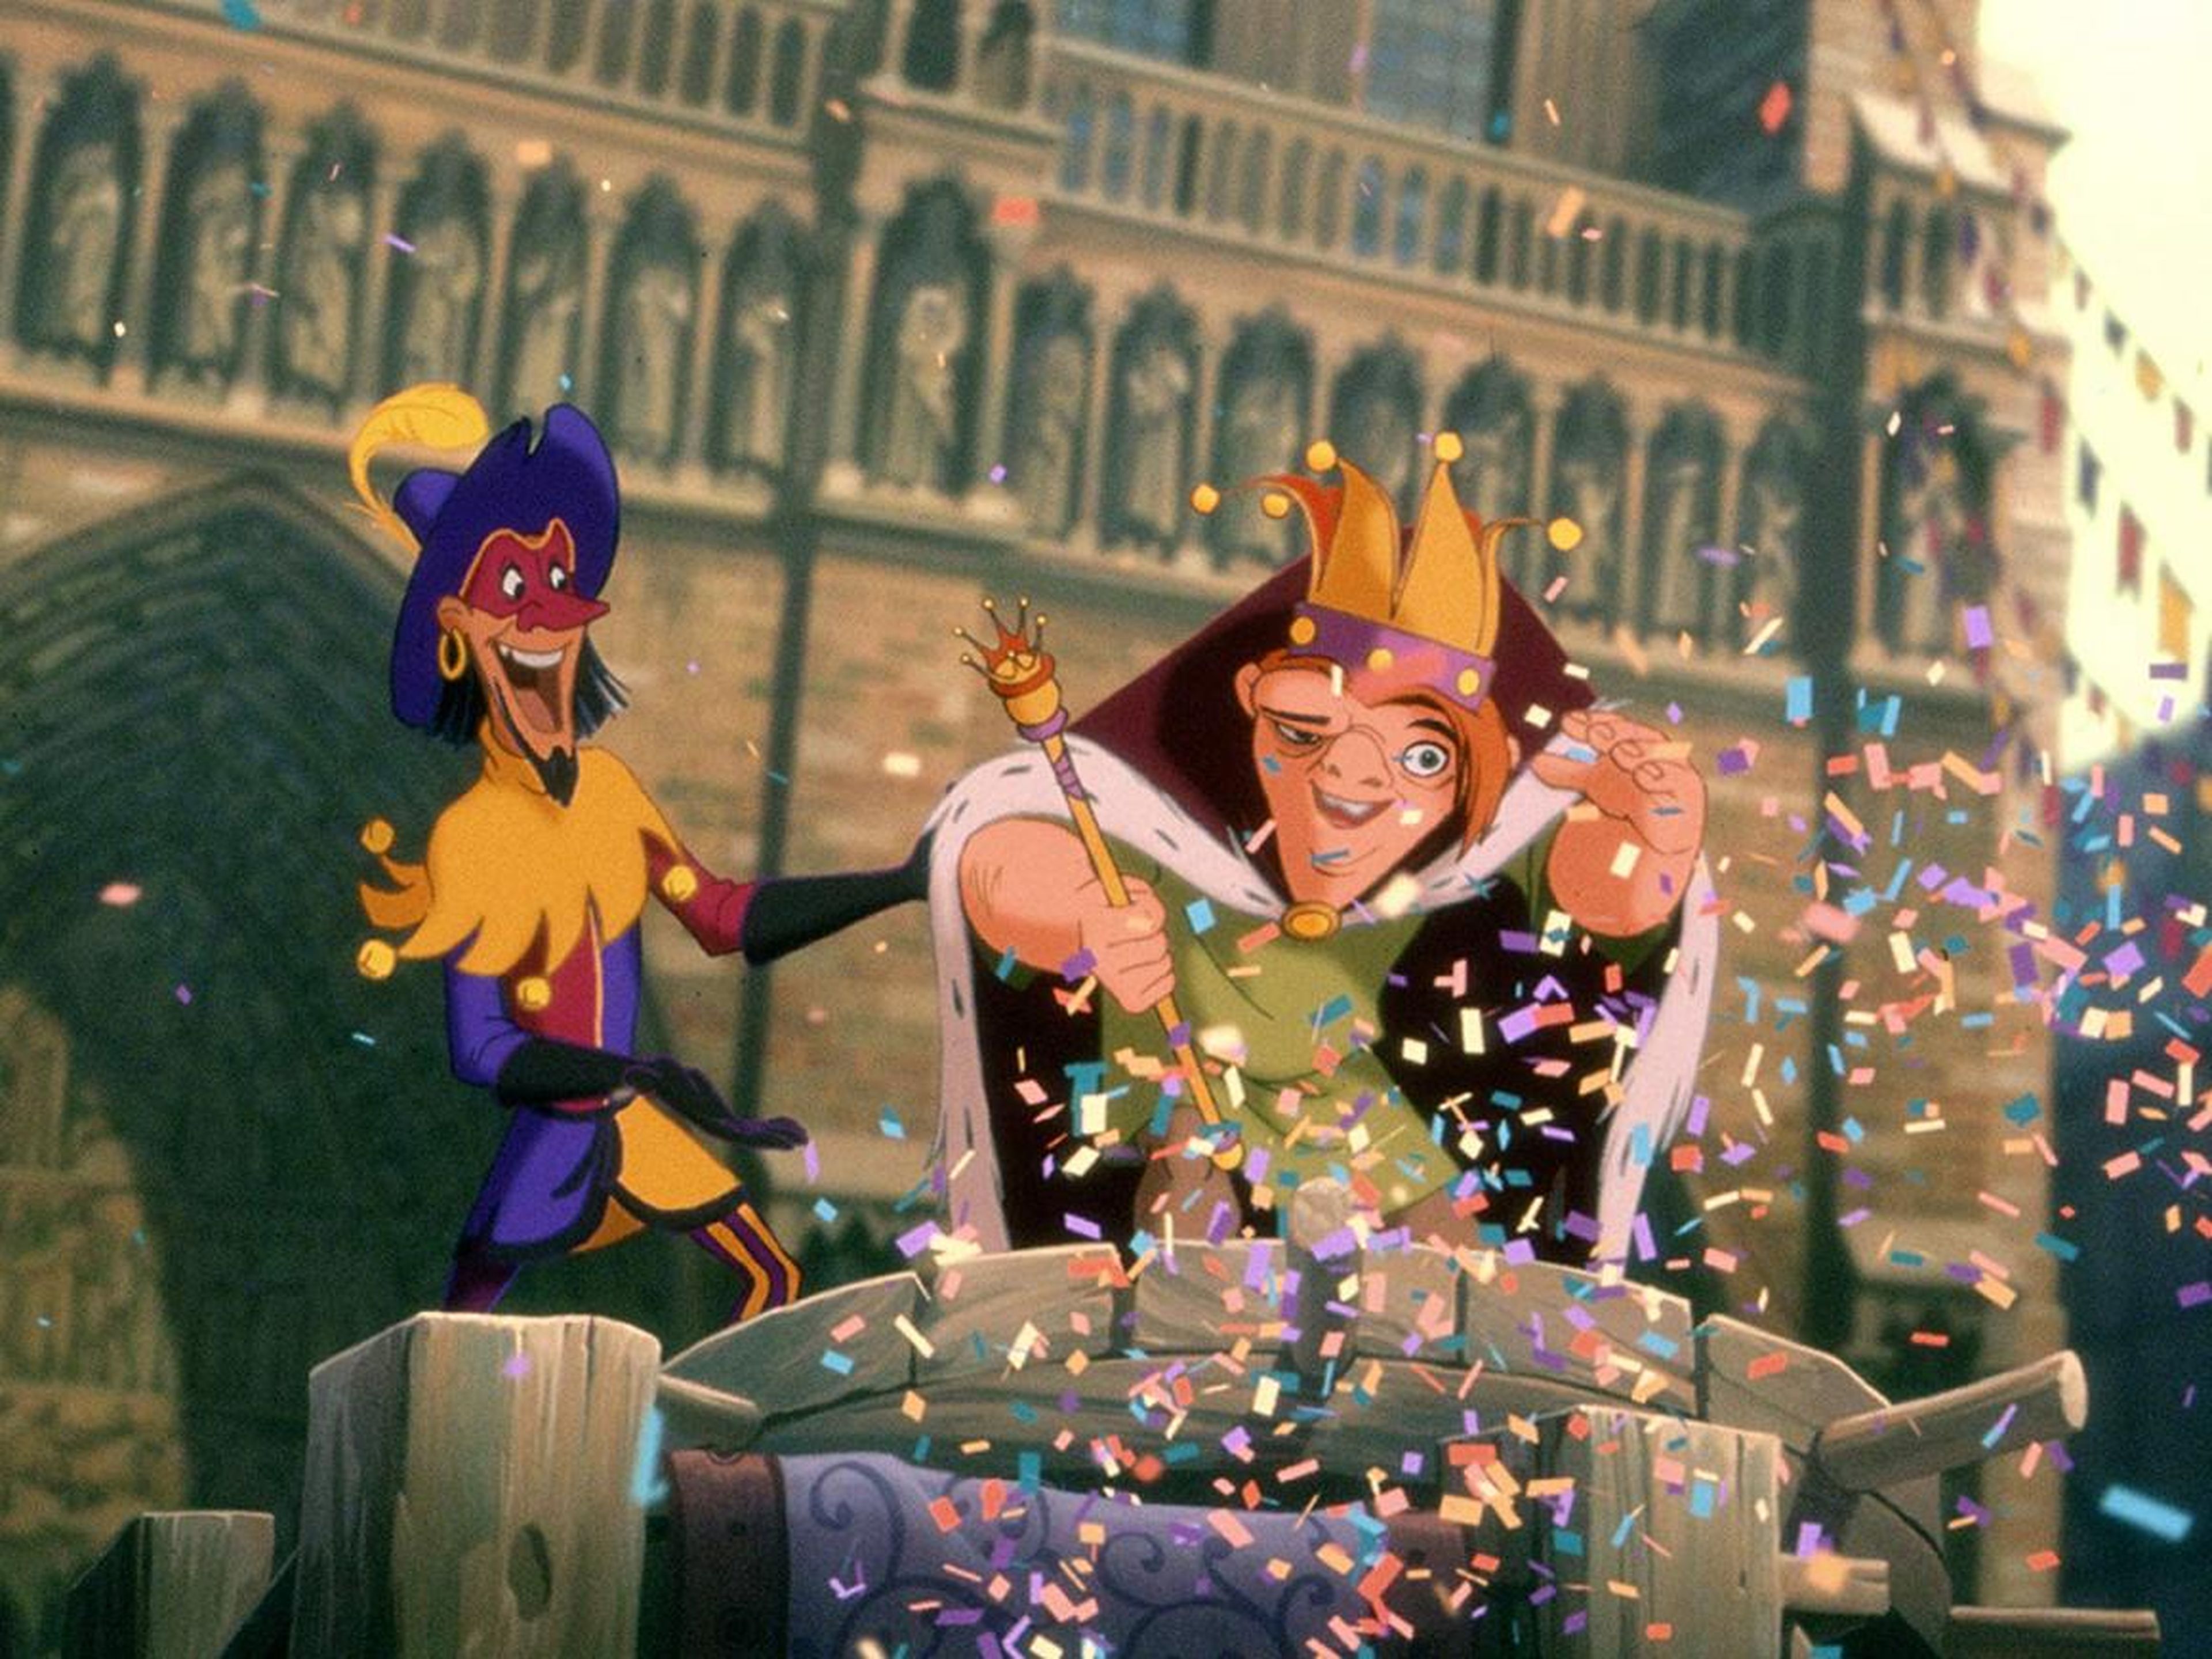 A scene from "The Hunchback of Notre Dame."